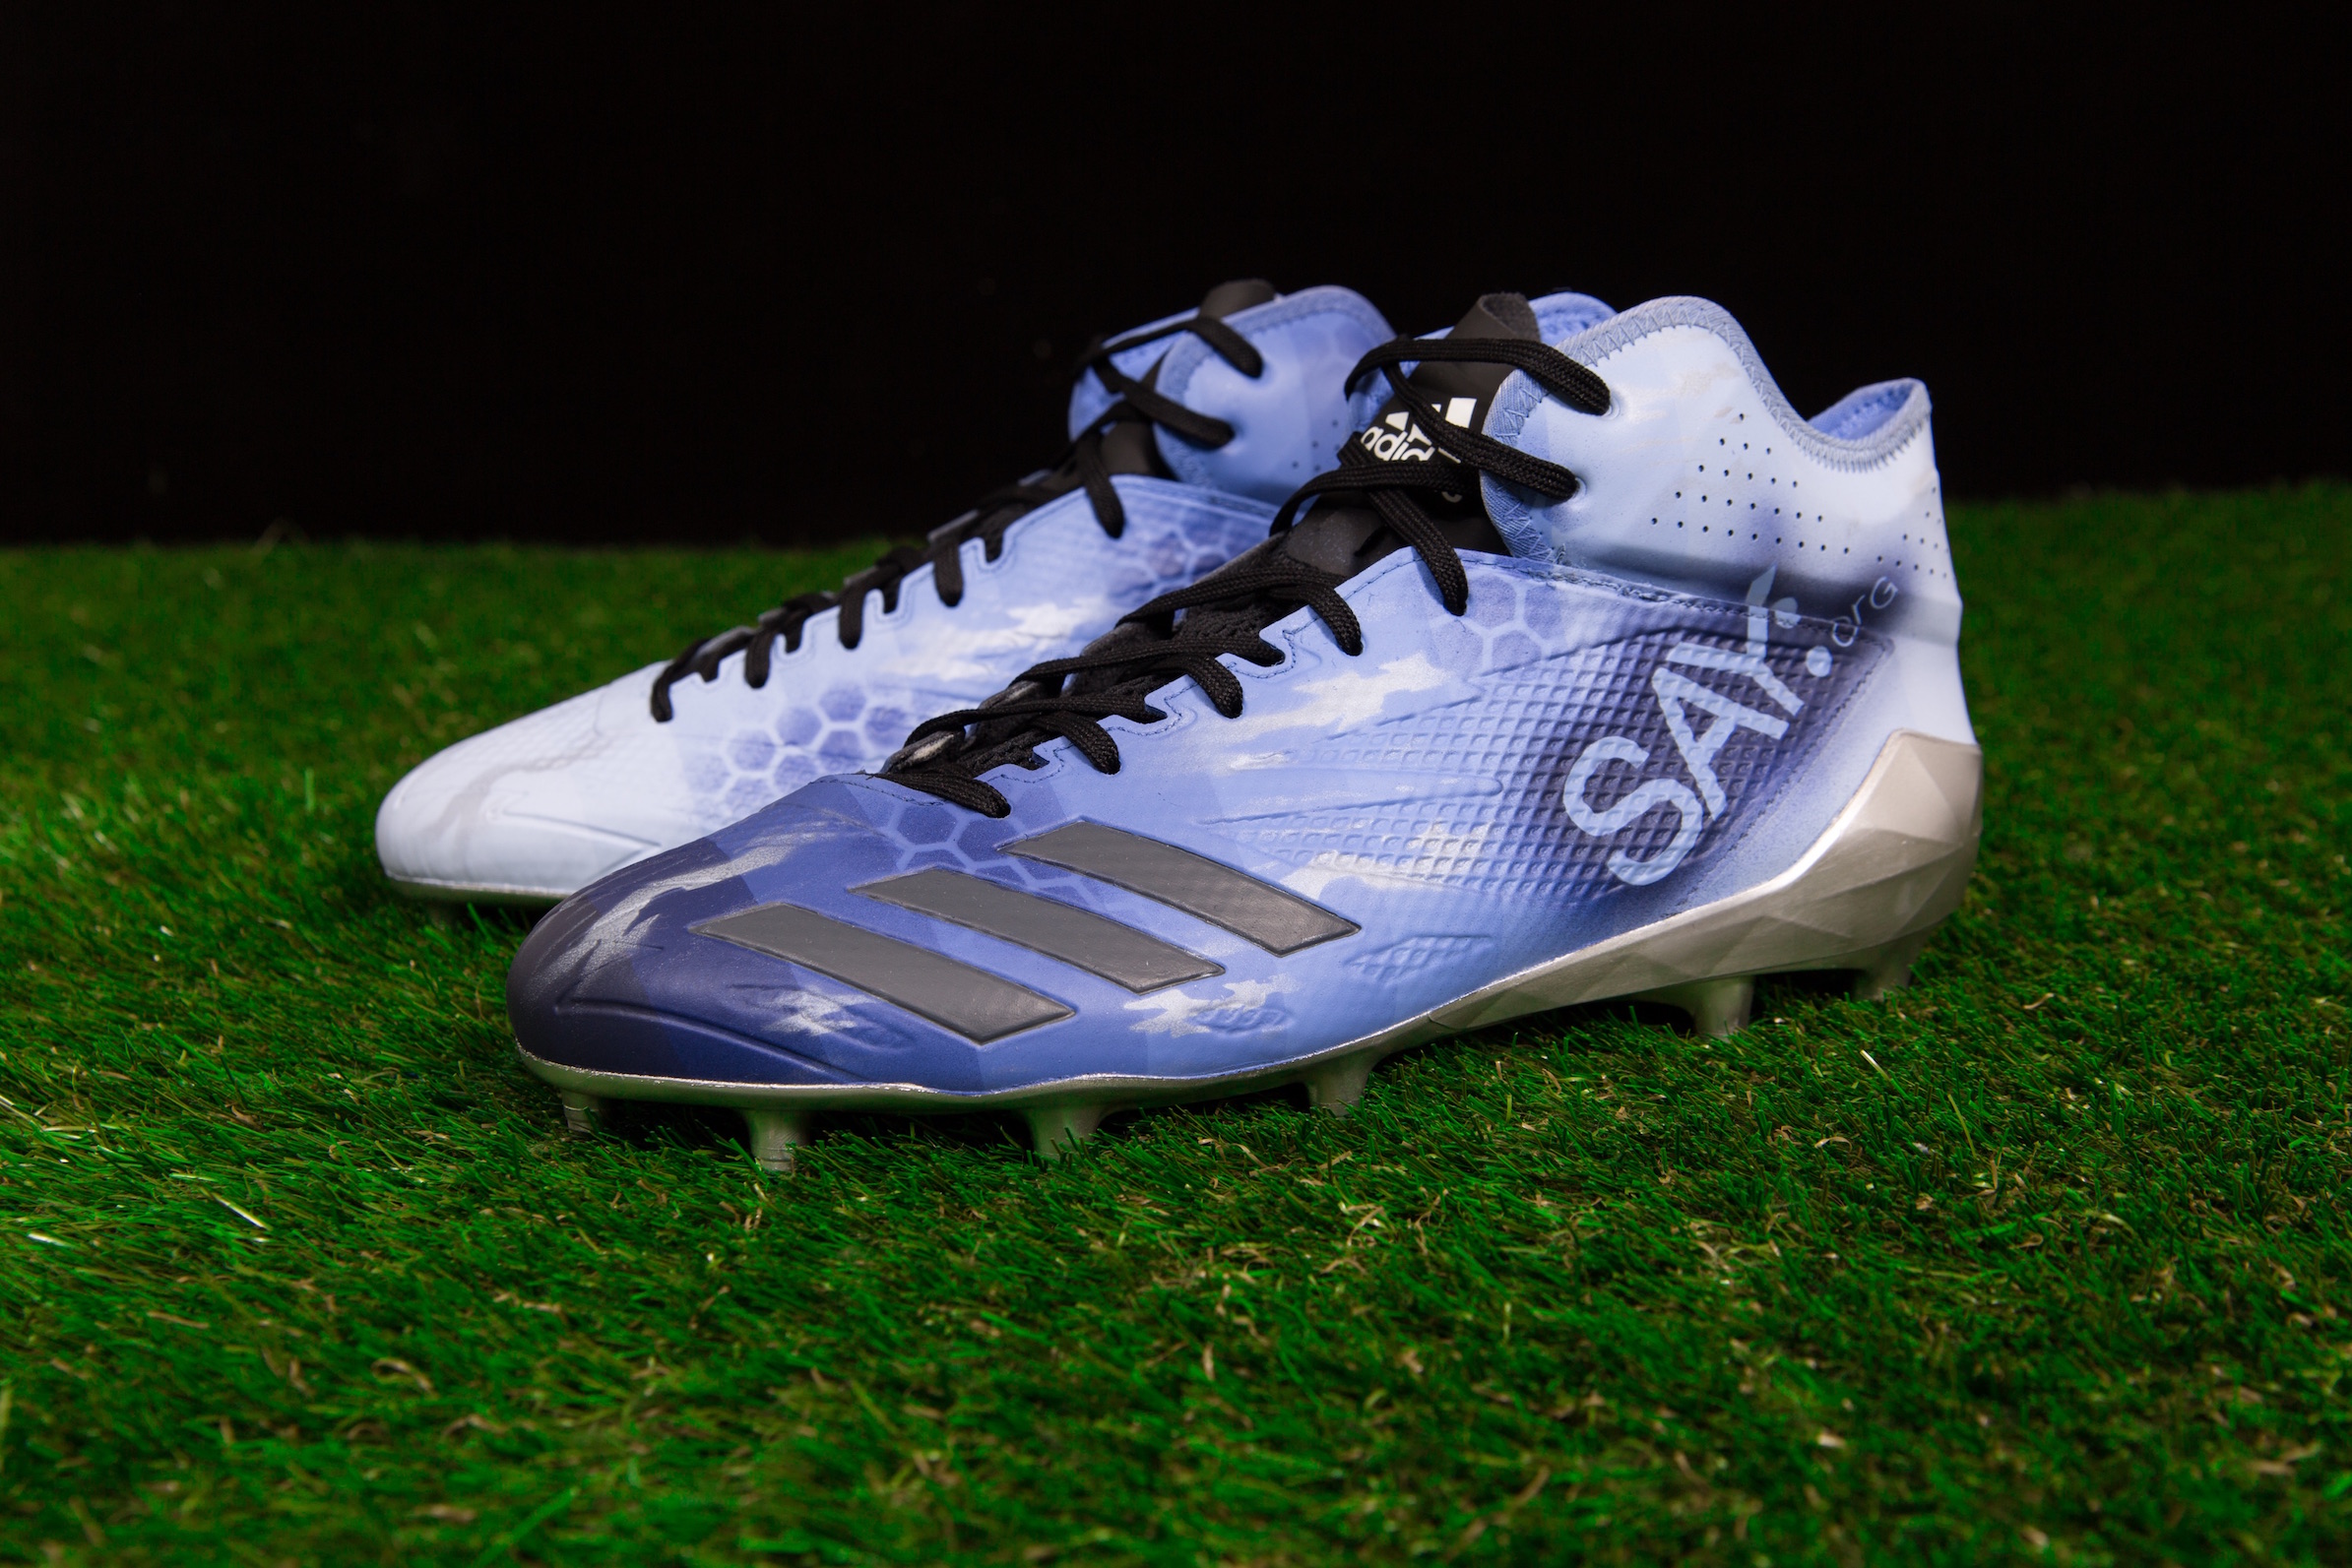 Damarious' Custom Cleats for SAY